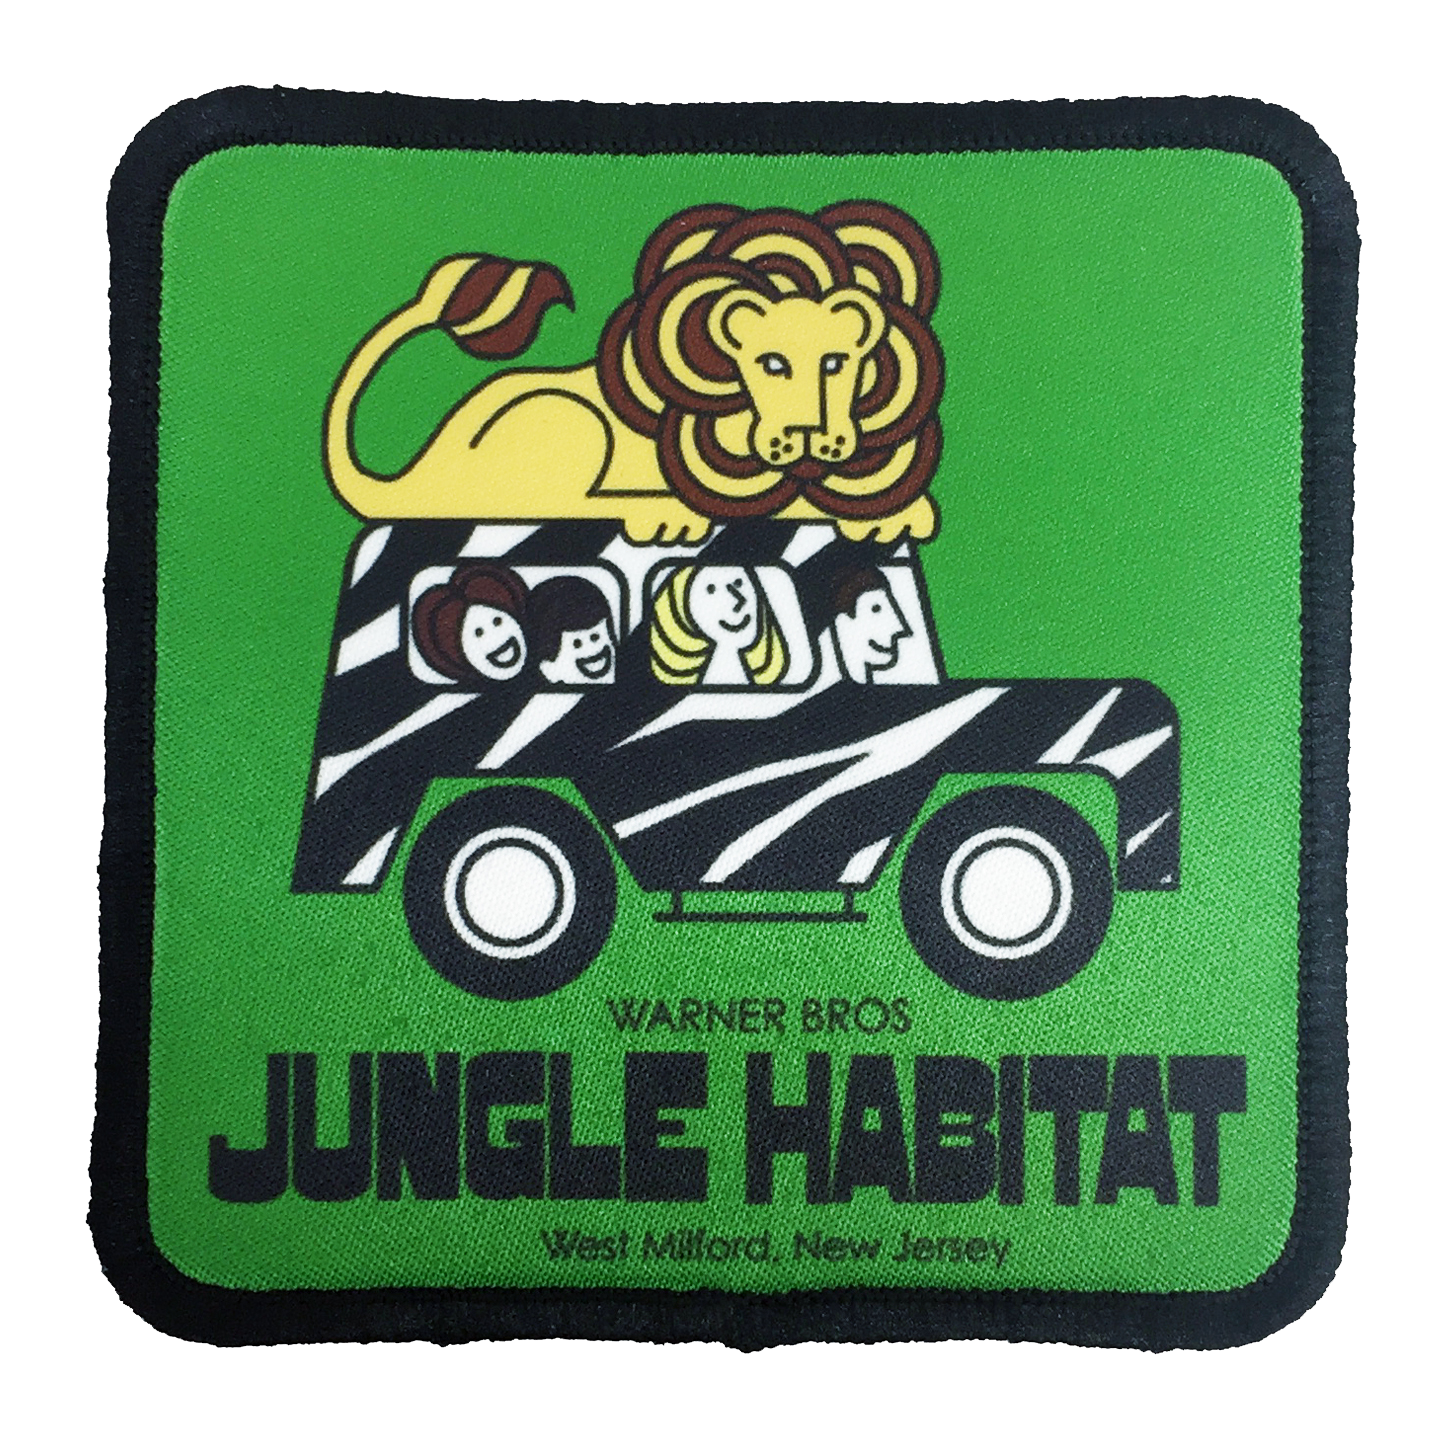 Jungle Habitat Iron-On Patch - UNMASKED Horror & Punk Patches and Decor